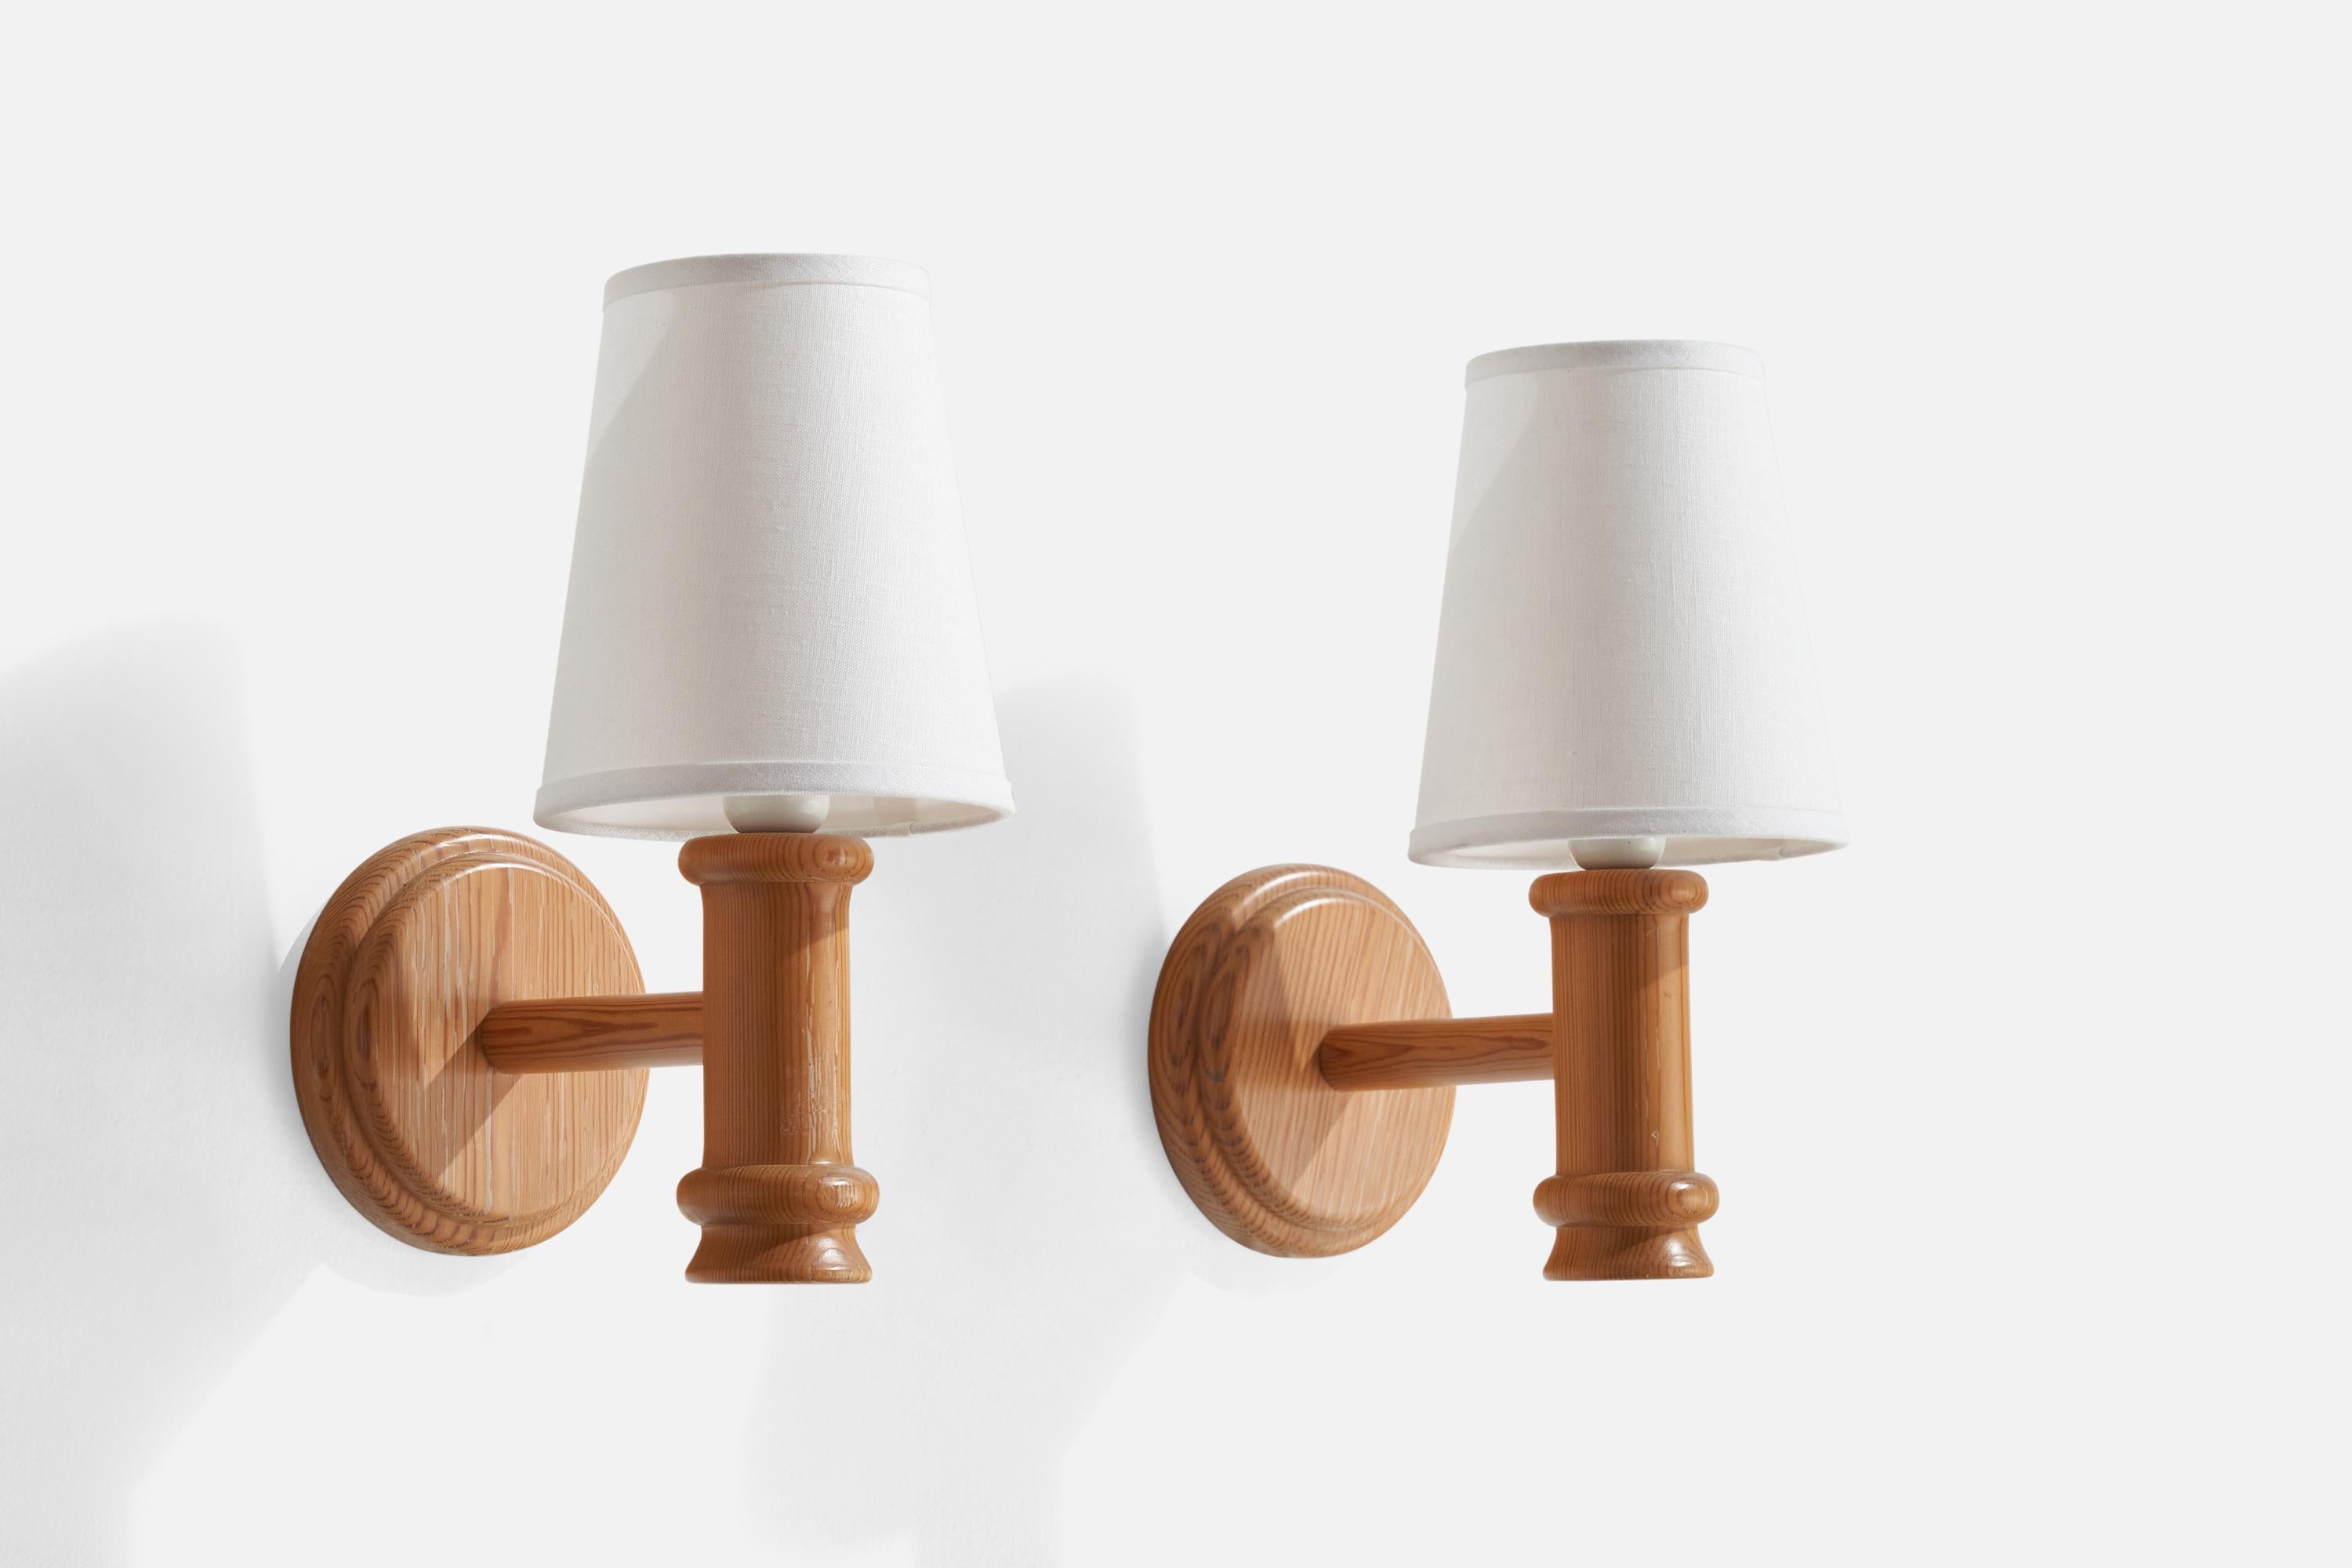 A pair of pine and white fabric wall lights designed and produced in Sweden, 1970s.

Overall Dimensions (inches): 13” H x 6.75” W x 9.75” D
Back Plate Dimensions (inches): n/a
Bulb Specifications: E-26 Bulb
Number of Sockets: 2
All lighting will be